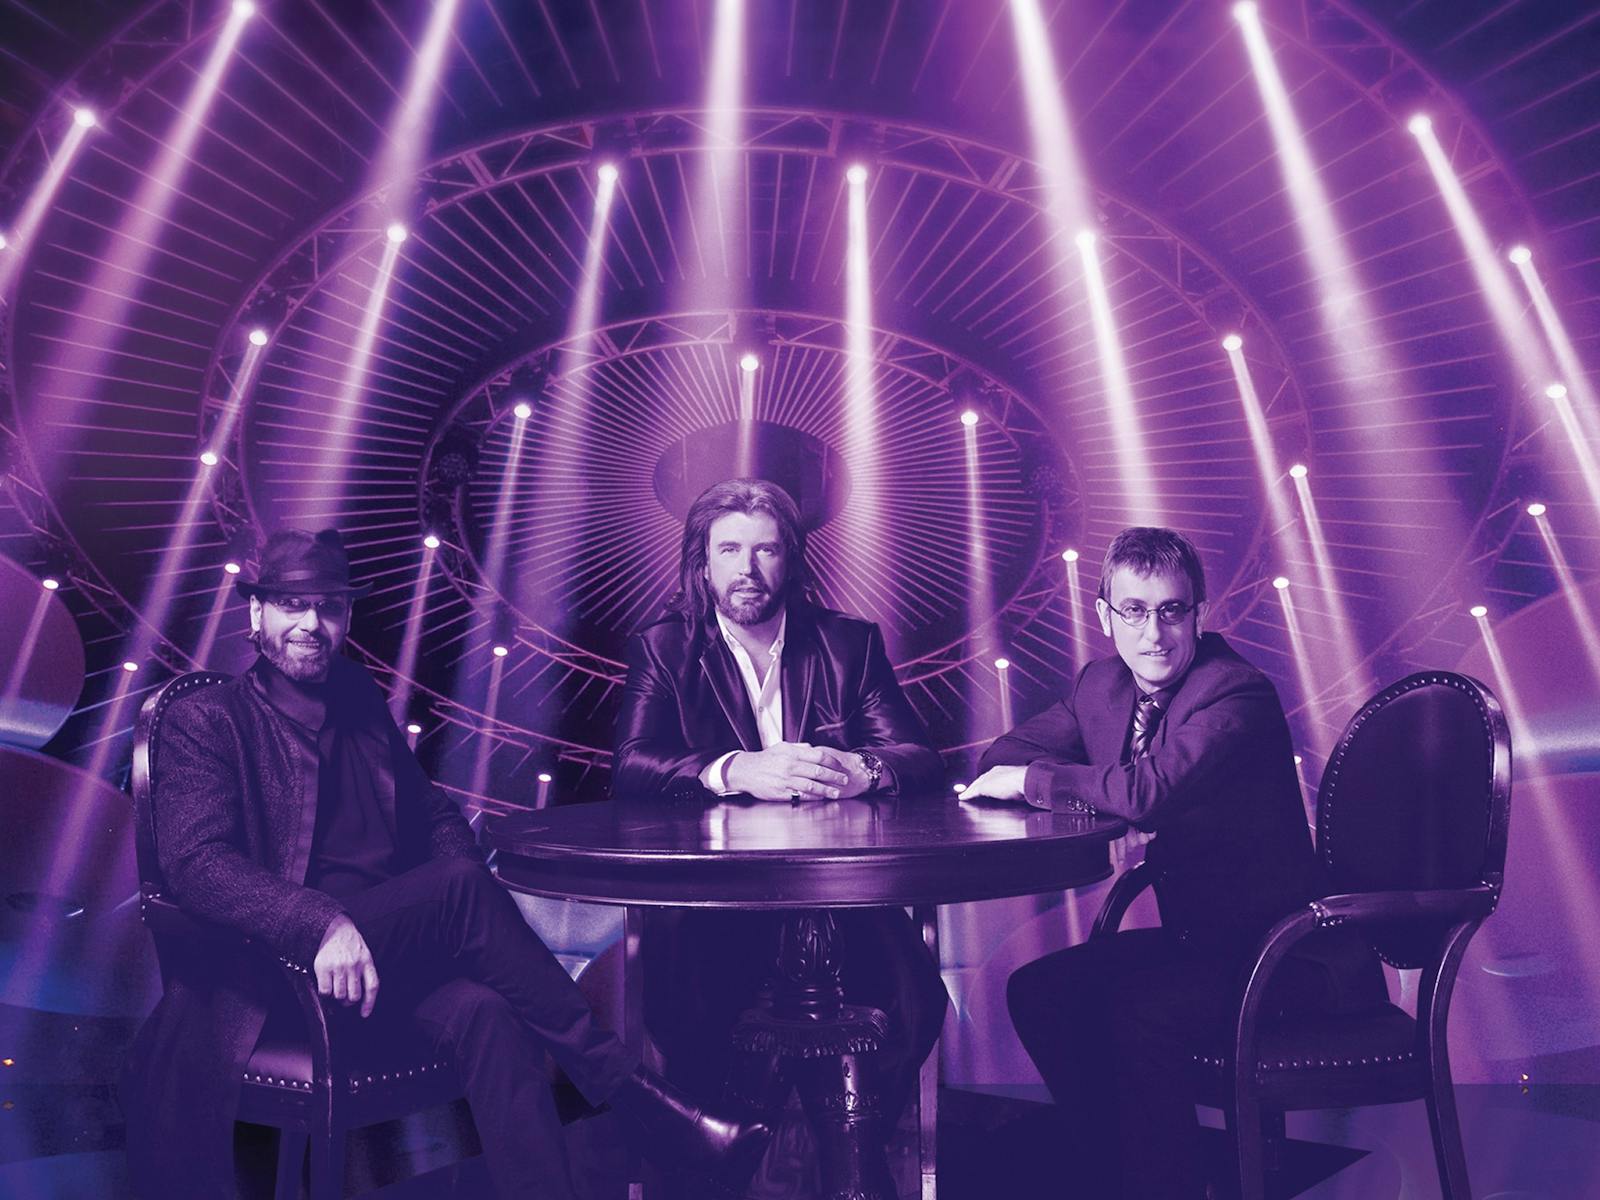 Image for The Australian Bee Gees Show - 25th Anniversary Tour - Shepparton